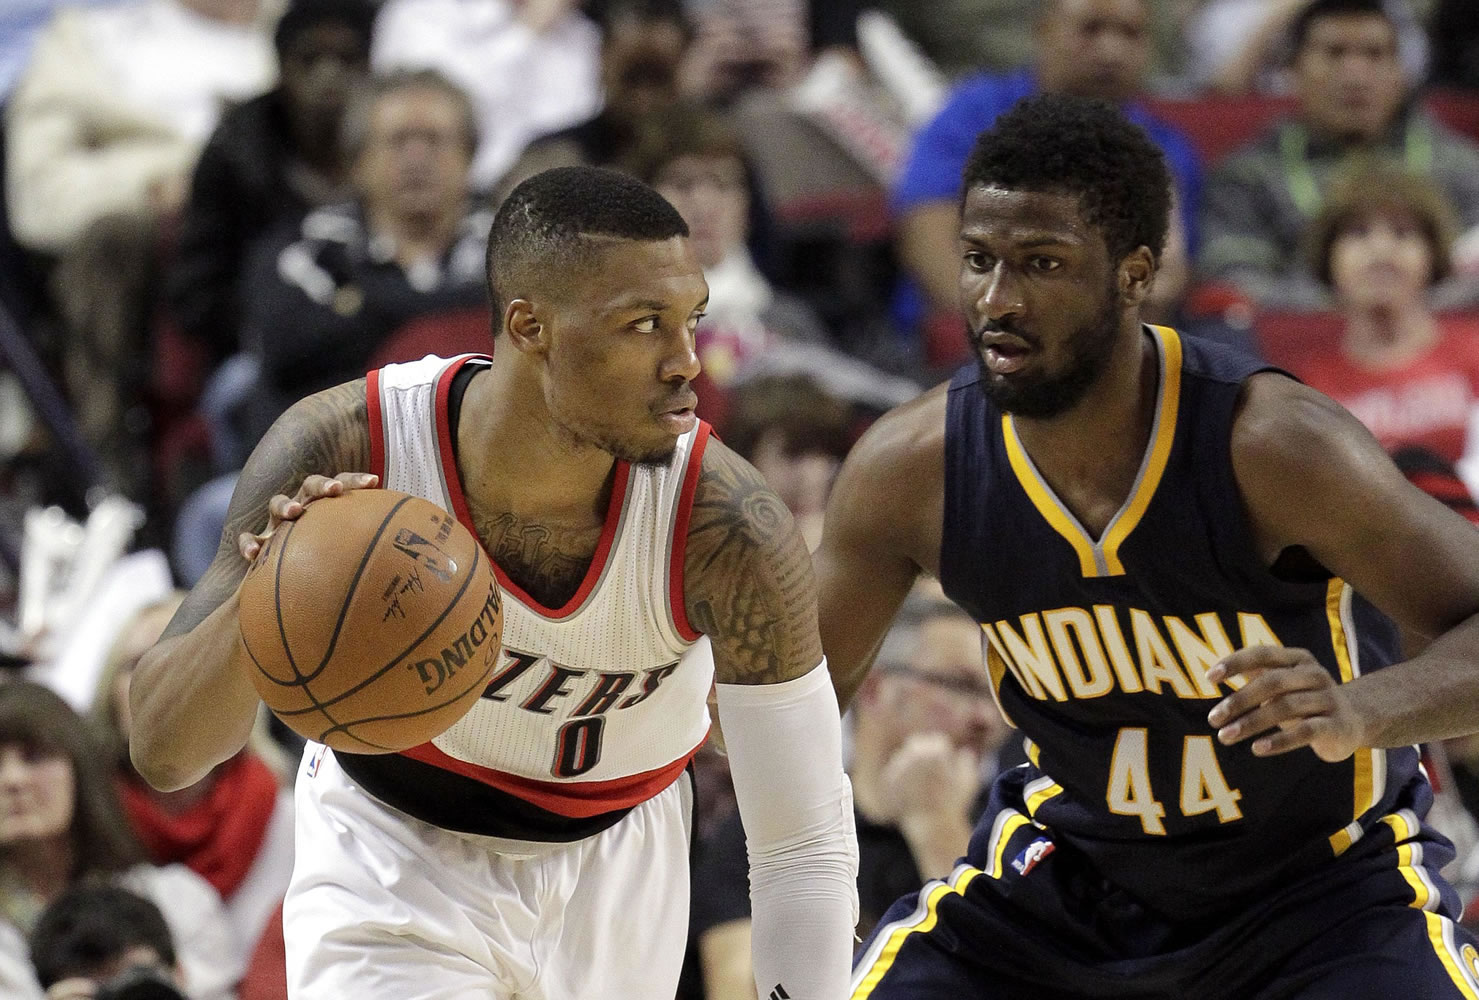 Portland Trail Blazers guard Damian Lillard, left, drives against Indiana Pacers forward Solomon Hill during the second half Thursday, Dec. 4, 2014. Lillard led the Trail Blazers in scoring with 23 points as they beat the Pacers 88-82.